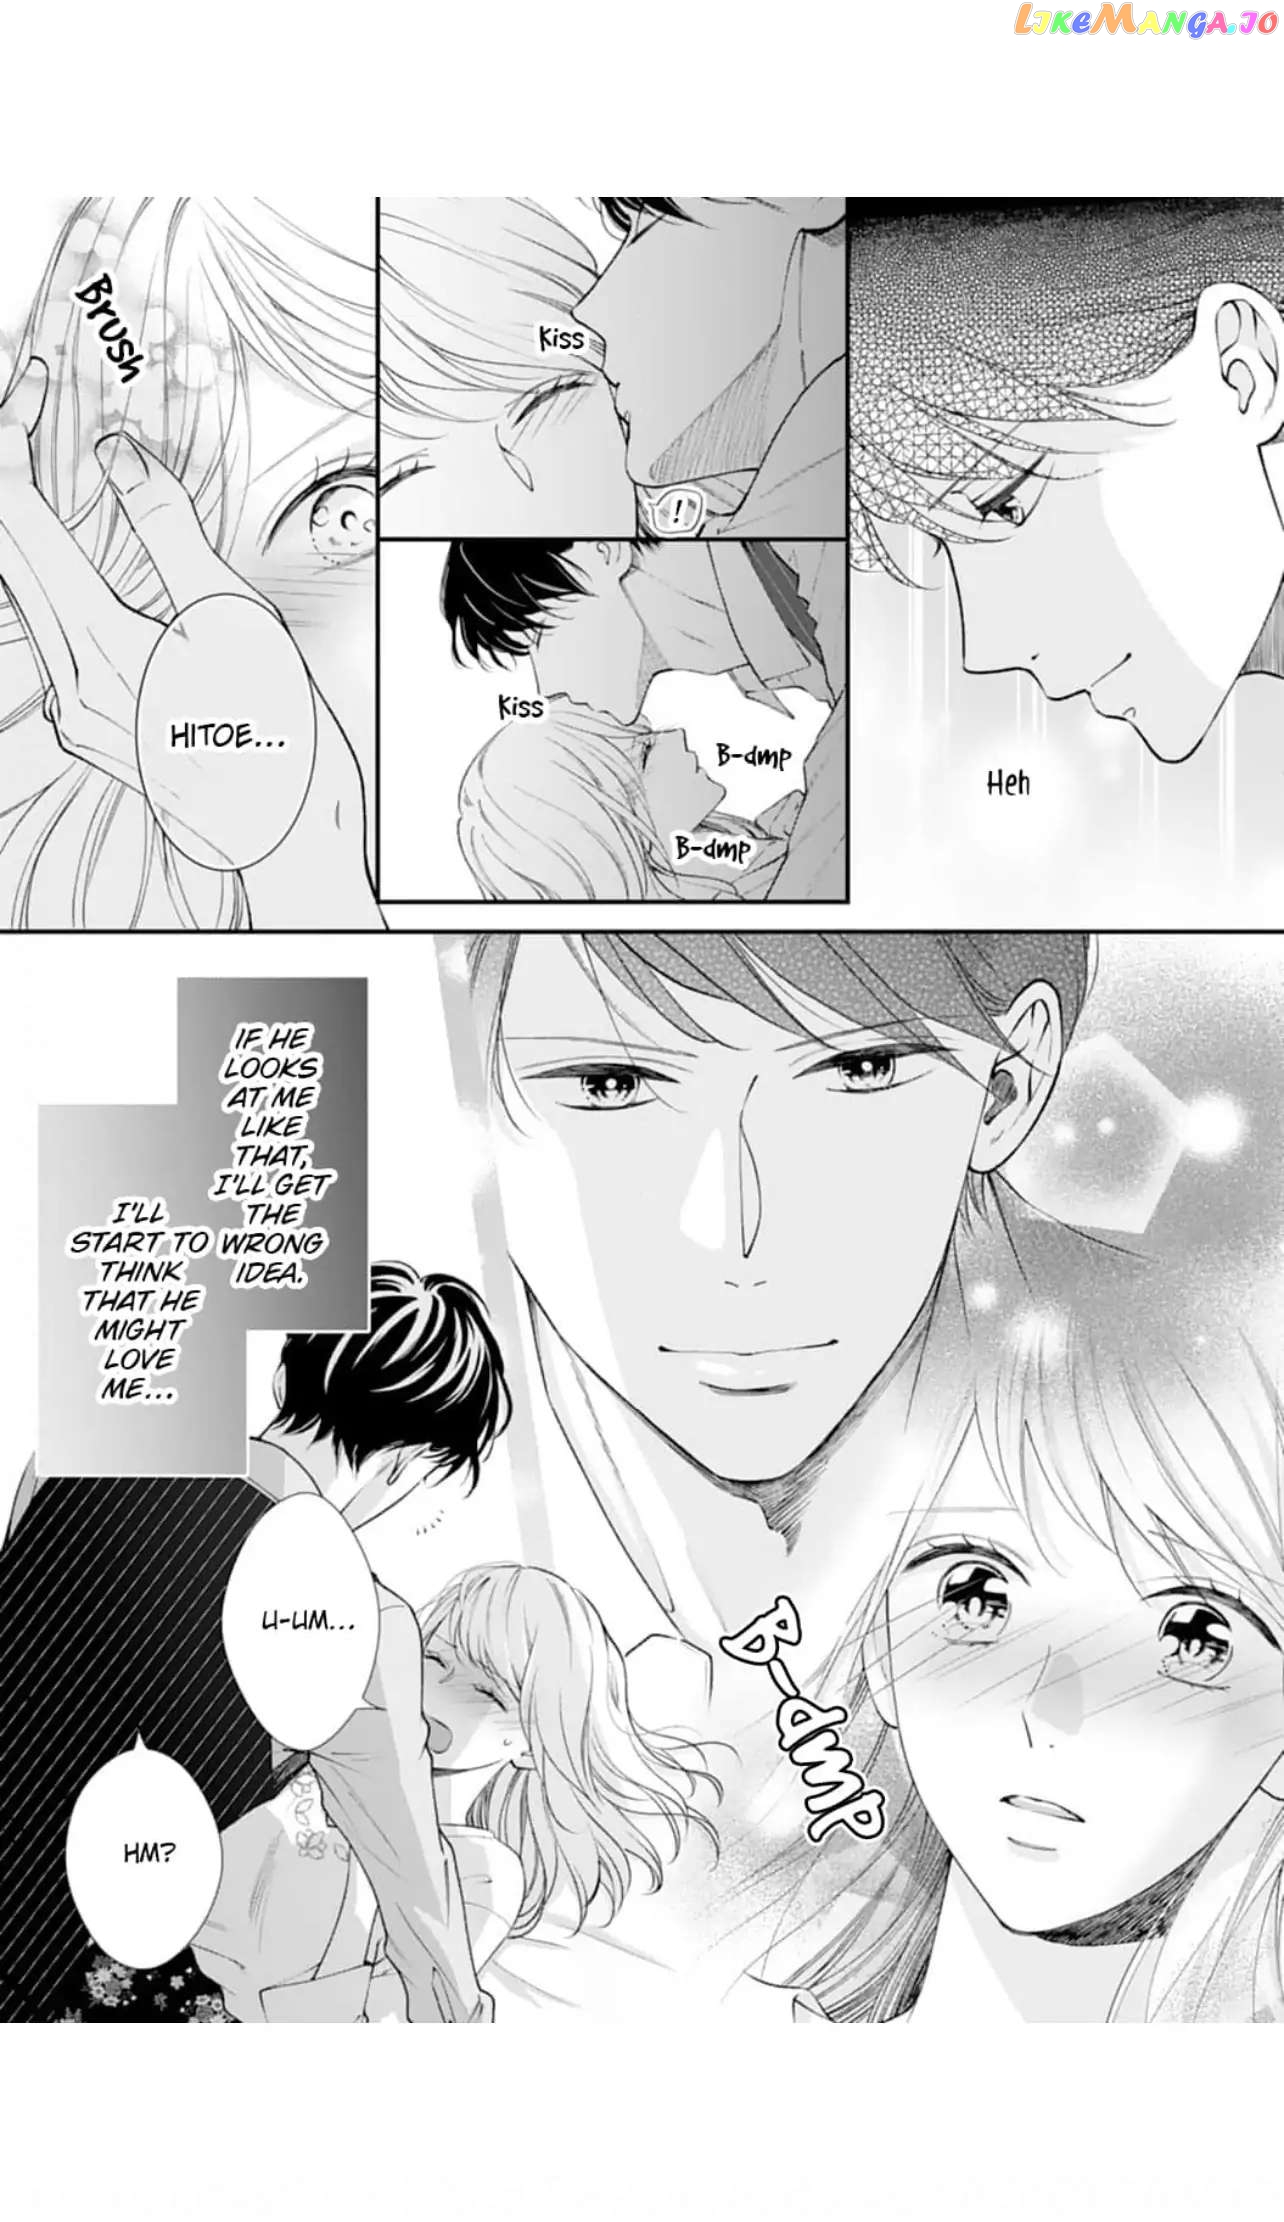 Nine Months Carrying Our Love: Our Last Night Together Was Only the Beginning Chapter 2 - page 4